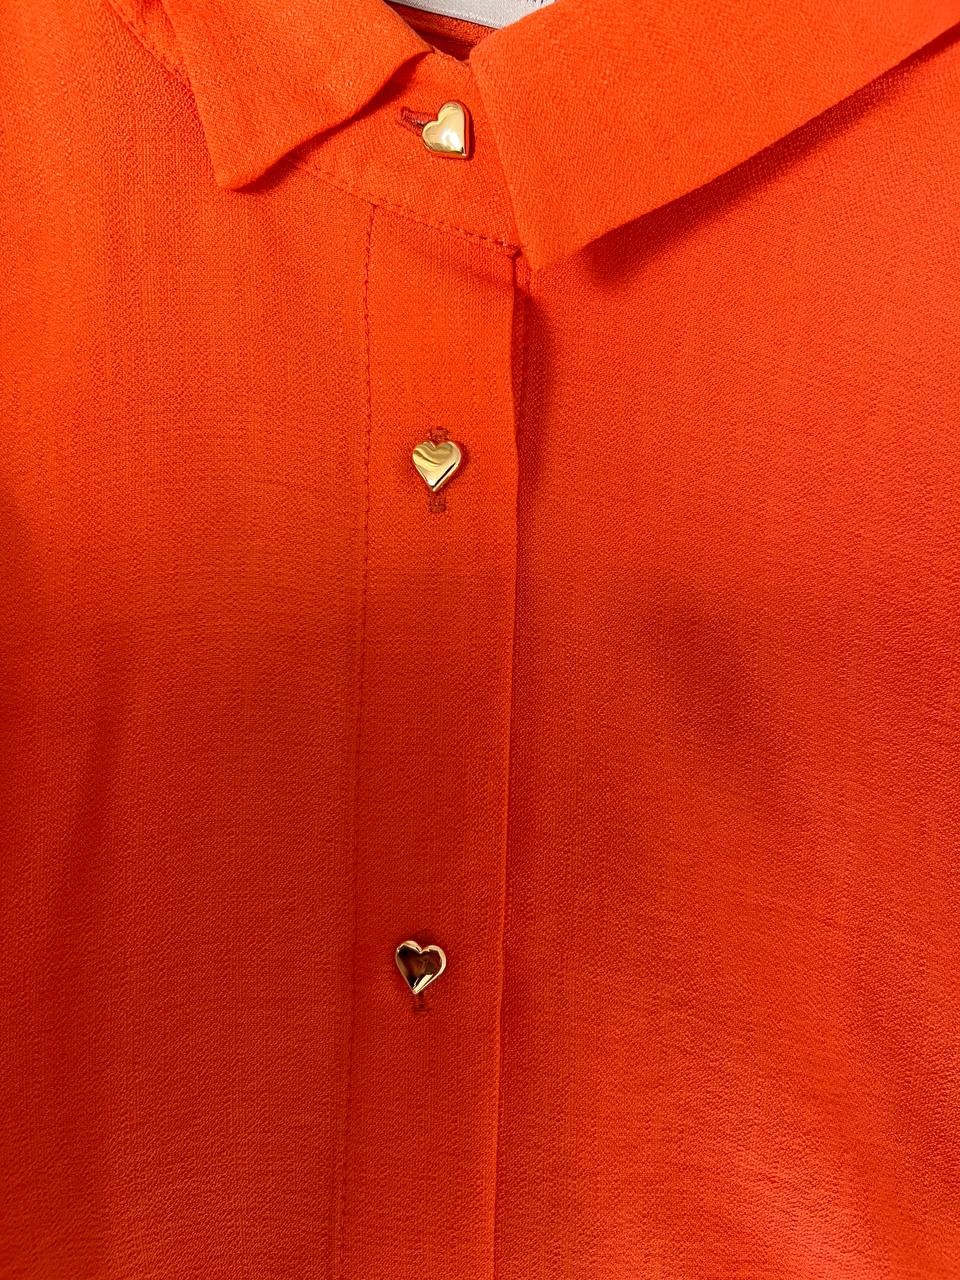 Orange suit with shorts with "heart' bottons.